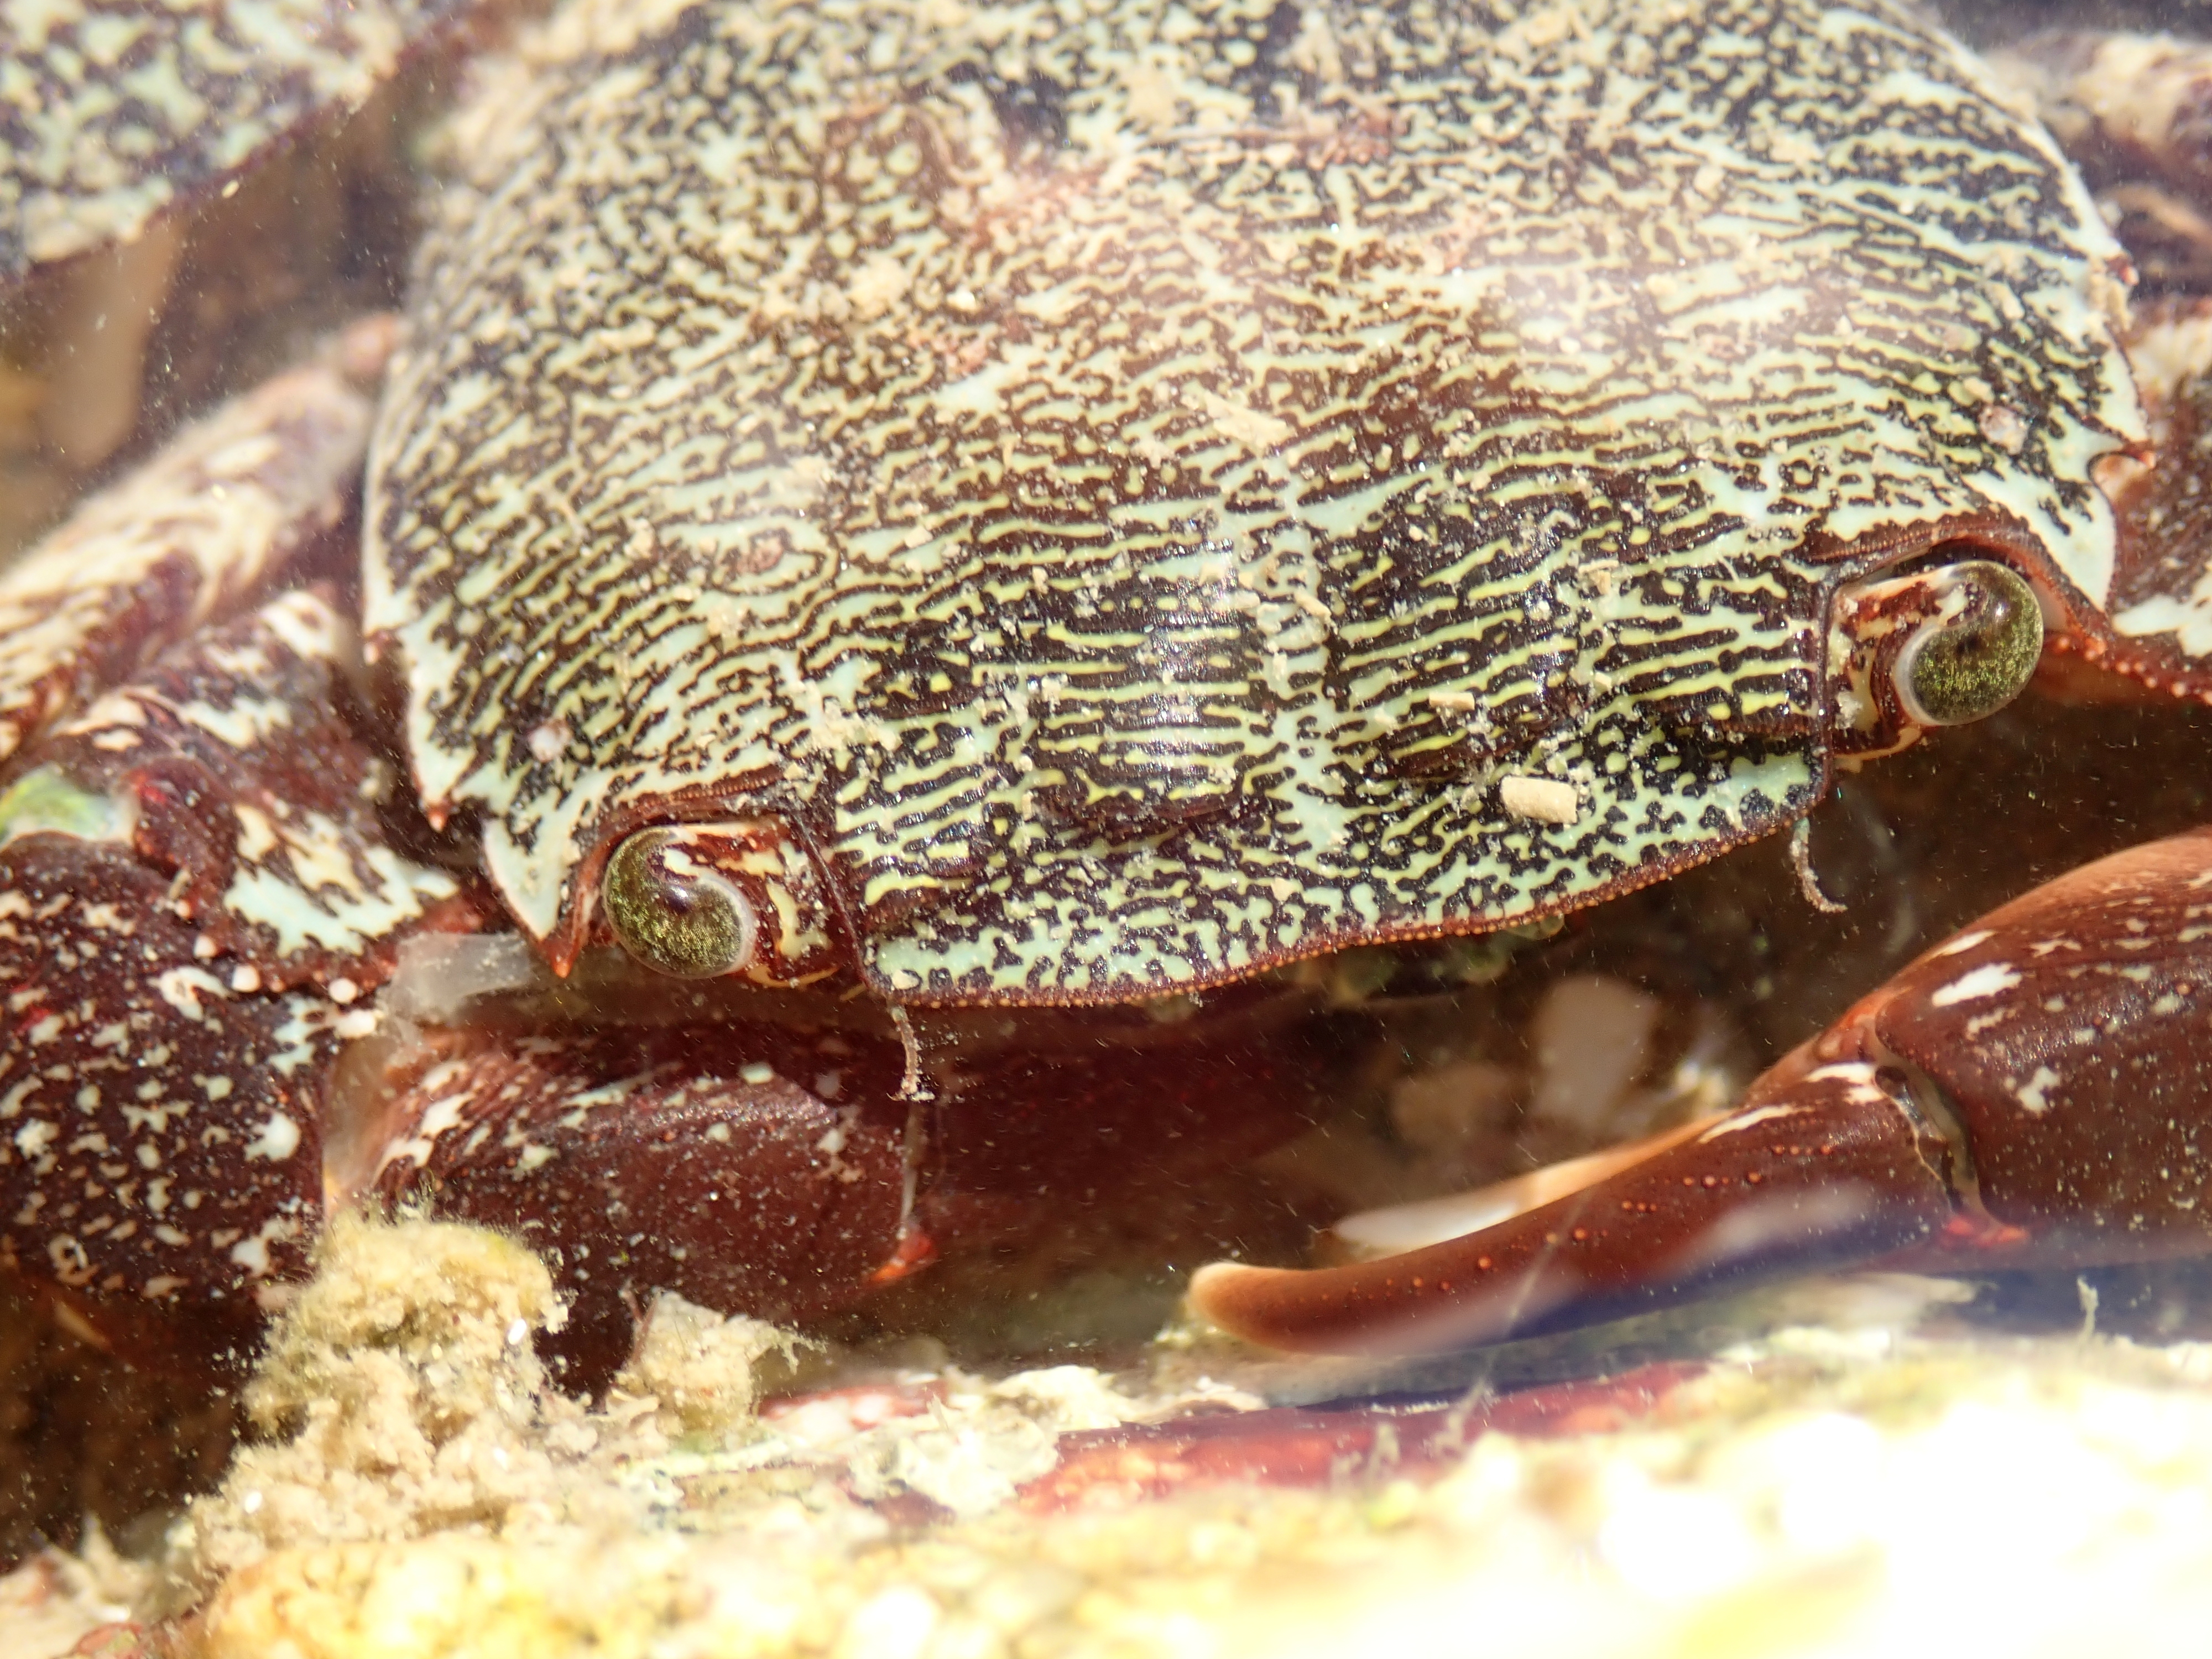 The three teeth along each side of the carapace distinguish this species from other rock crabs